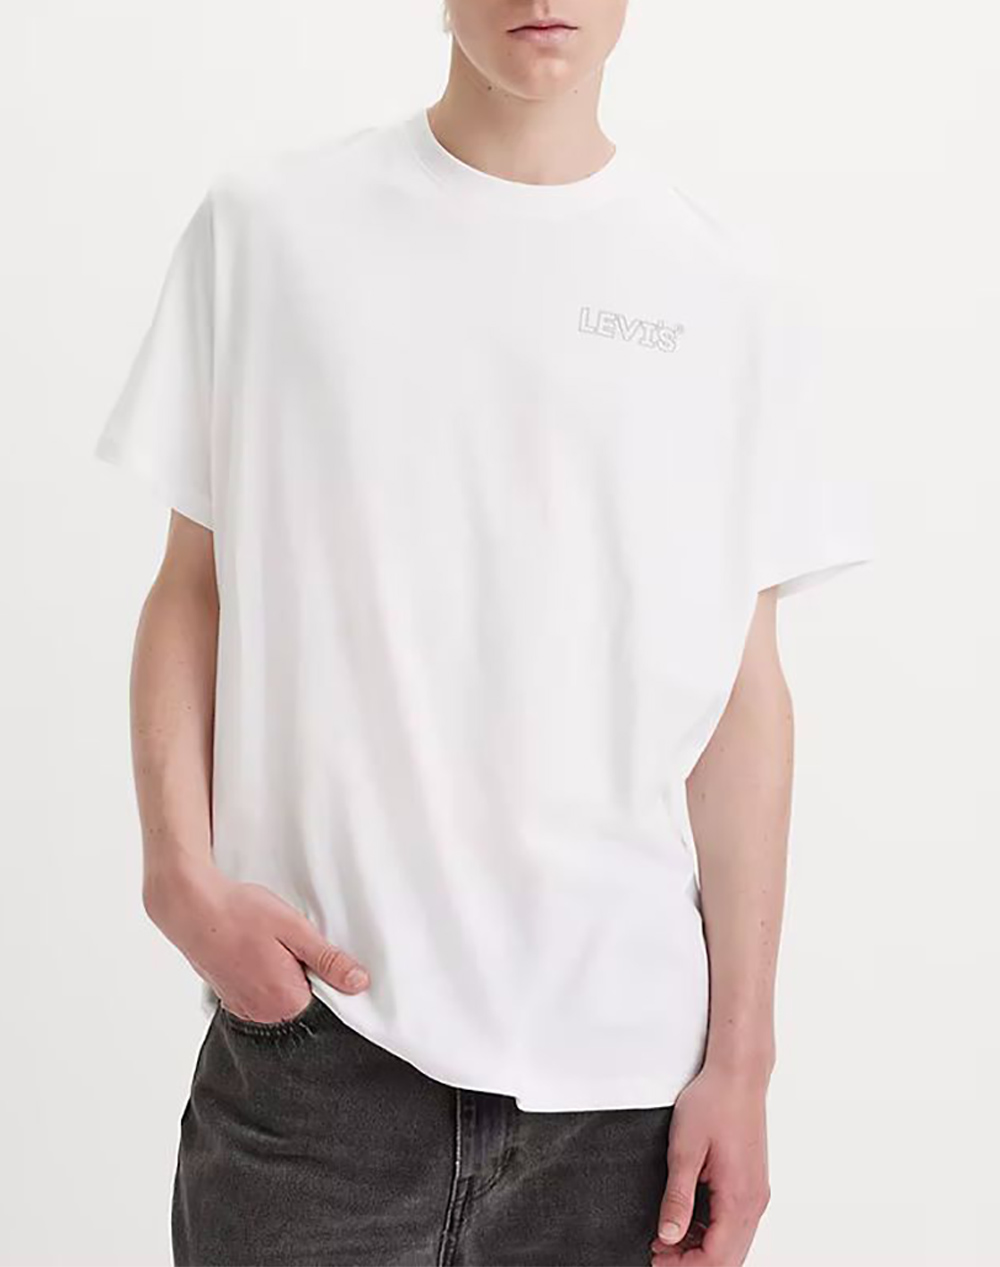 LEVIS RELAXED FIT TEE 16143-1230-1230 White